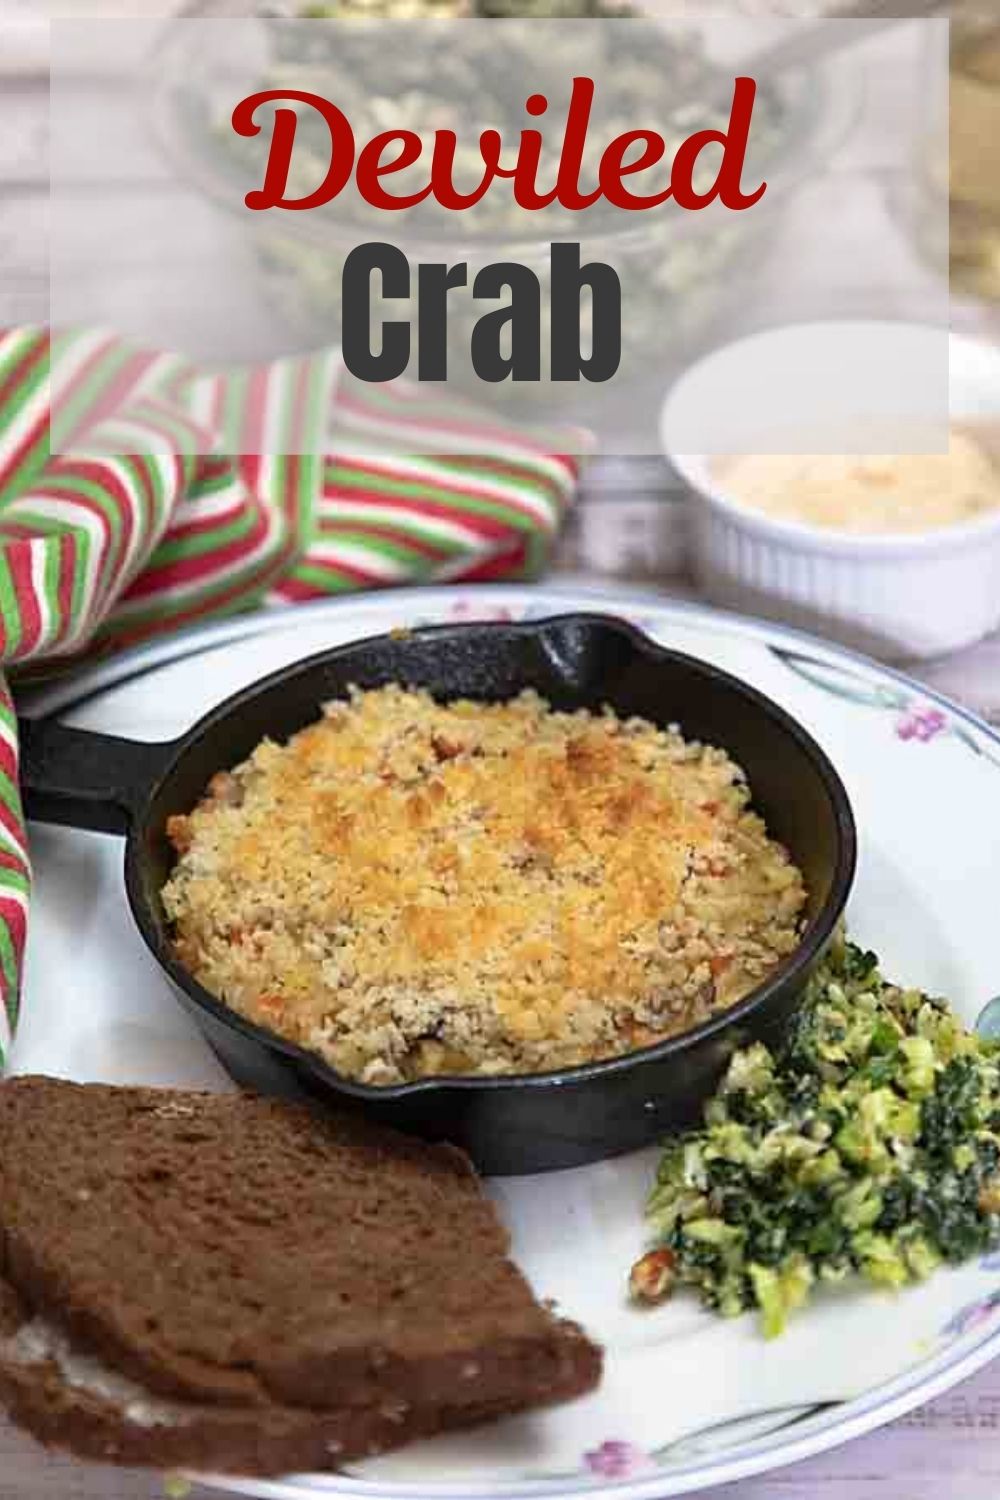 Rich & tasty, Deviled Crab is an easy yet special entrée or appetizer. Full of delicious crab, it's perfect for a beach lunch or date night!